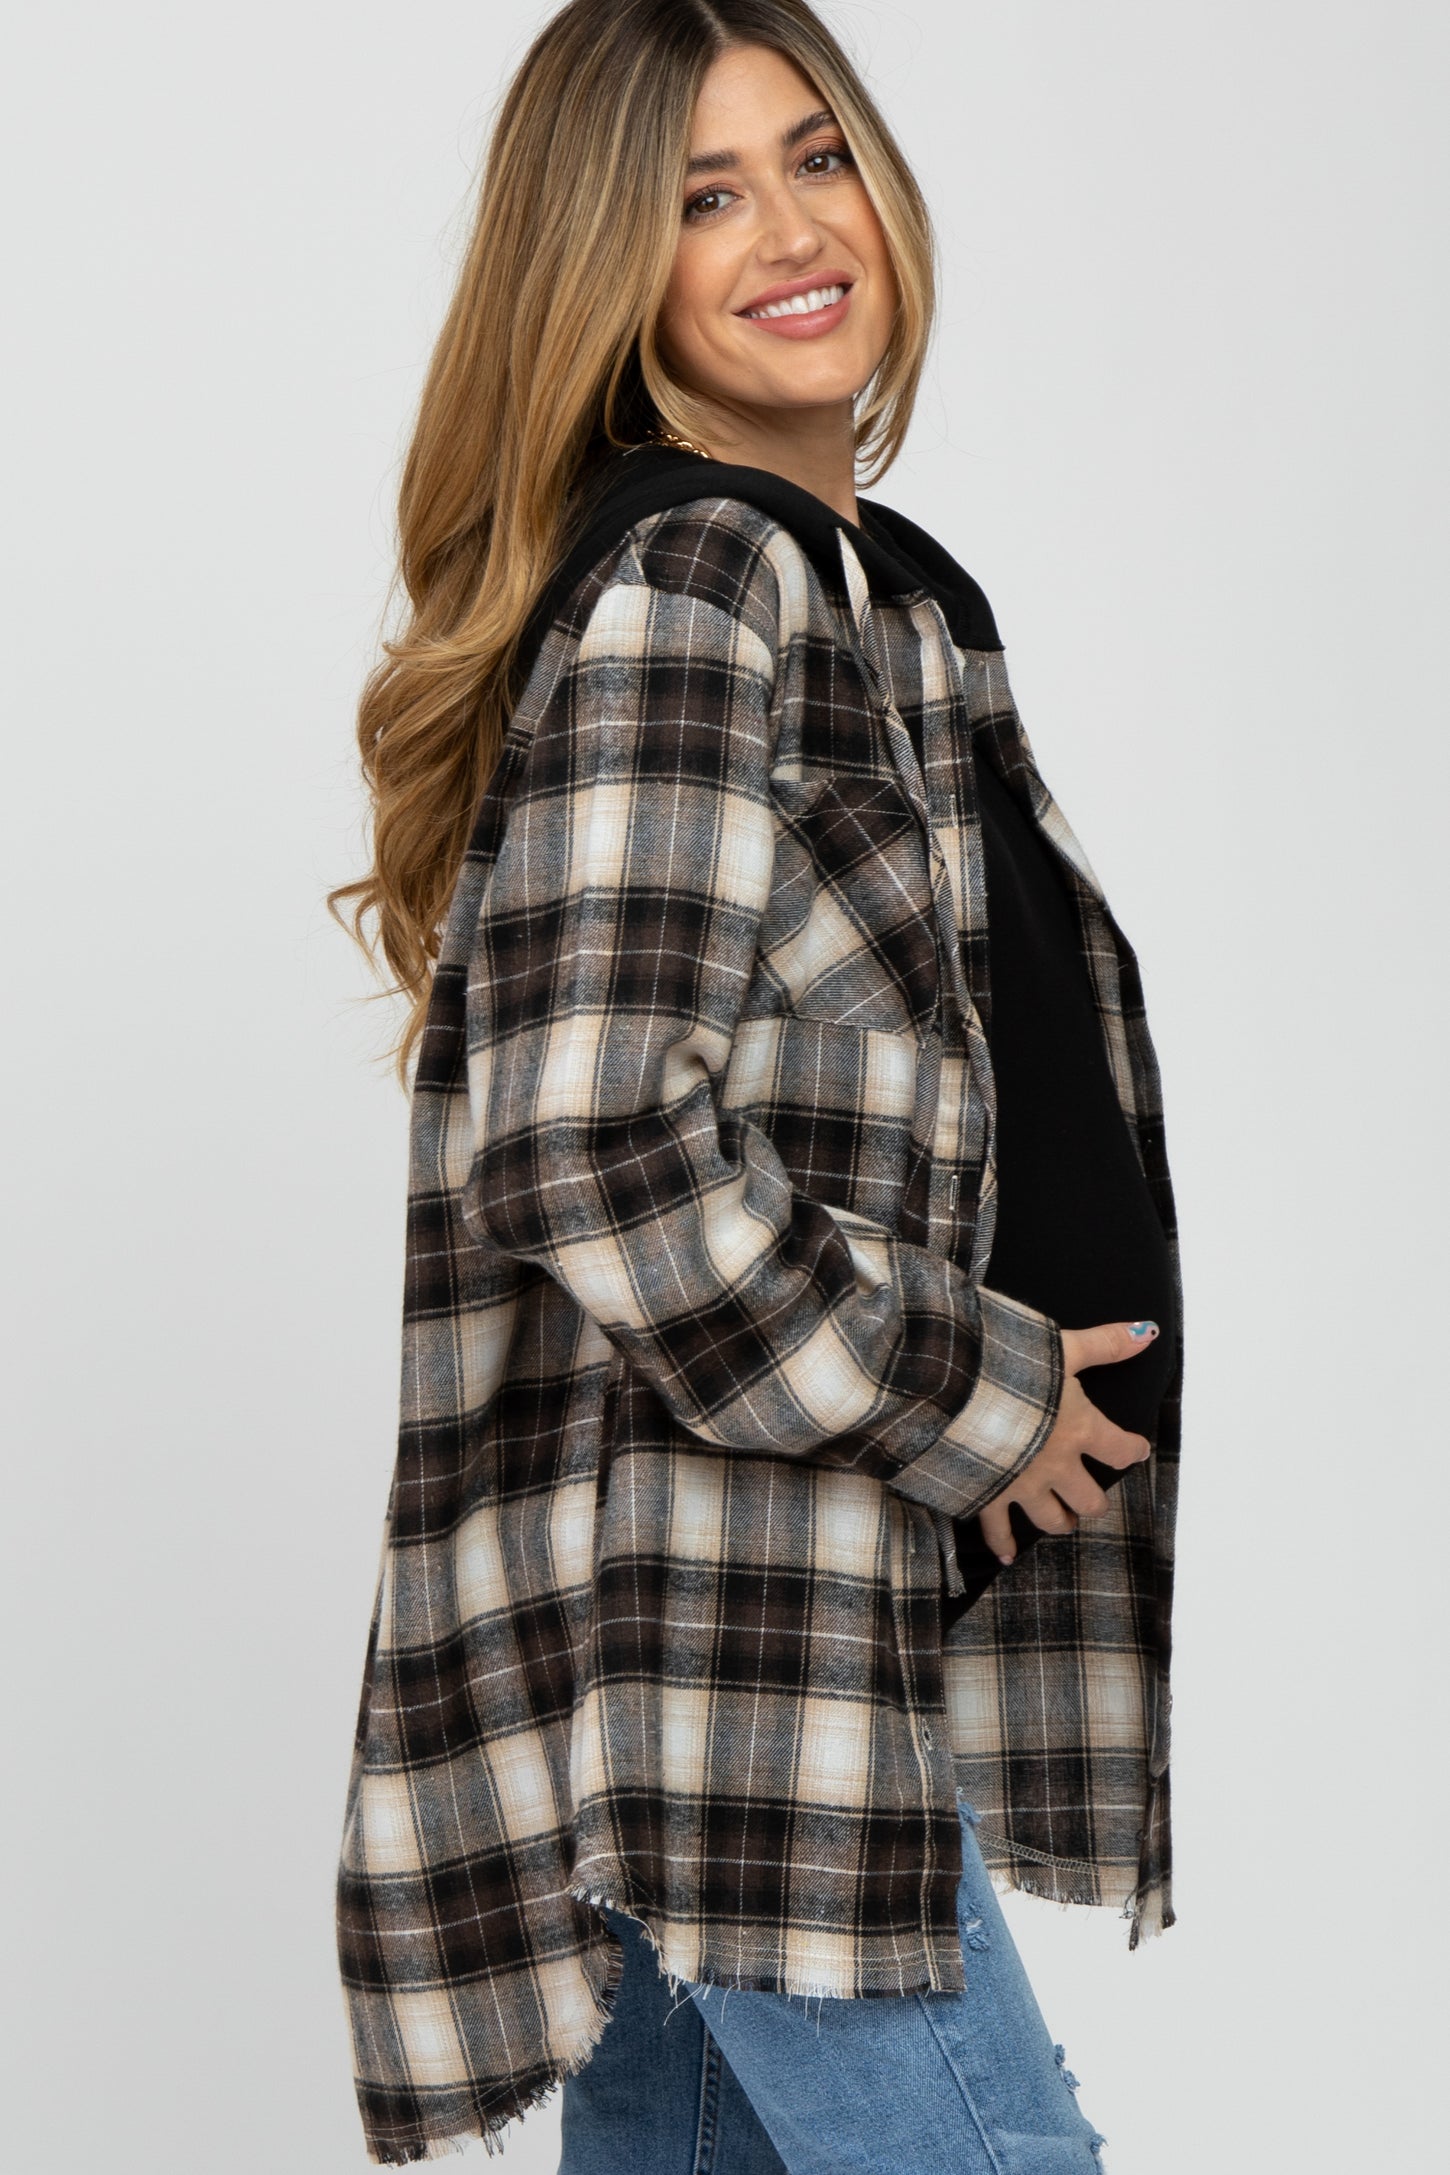 Brown Plaid Button Front Fringe Hem Hooded Maternity Top